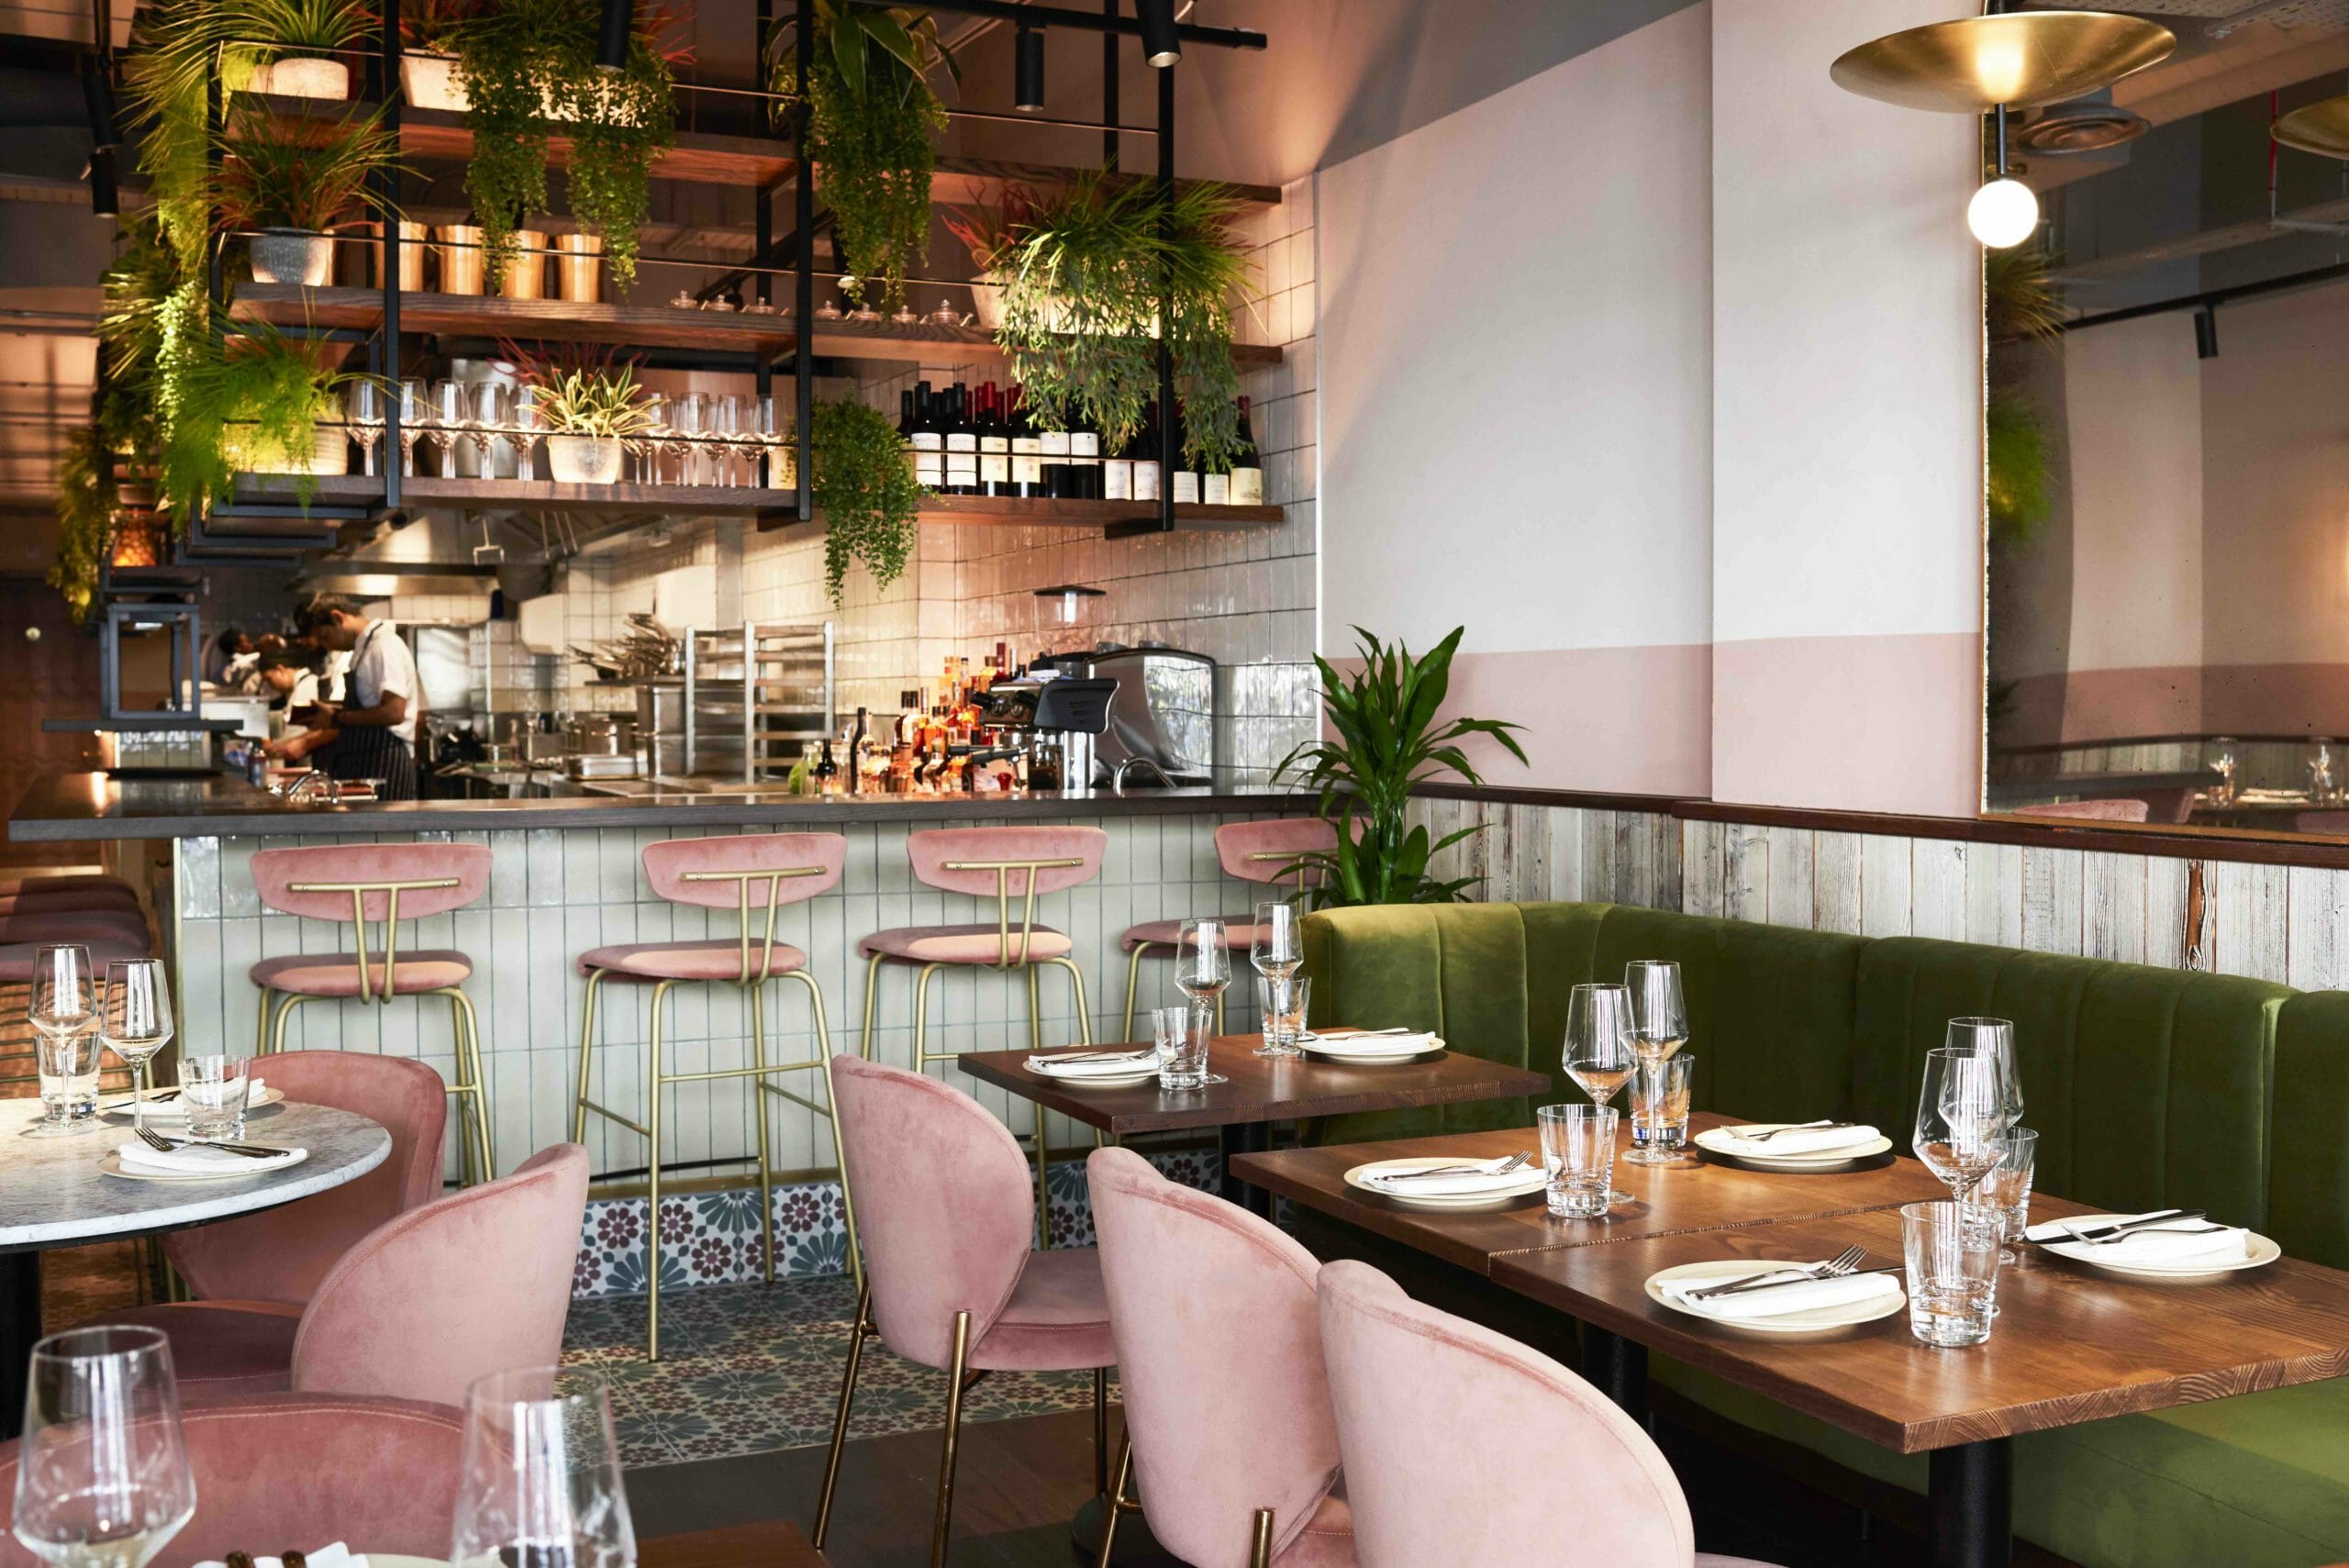 The Best Covent Garden Restaurants 15 Great Central London Eateries